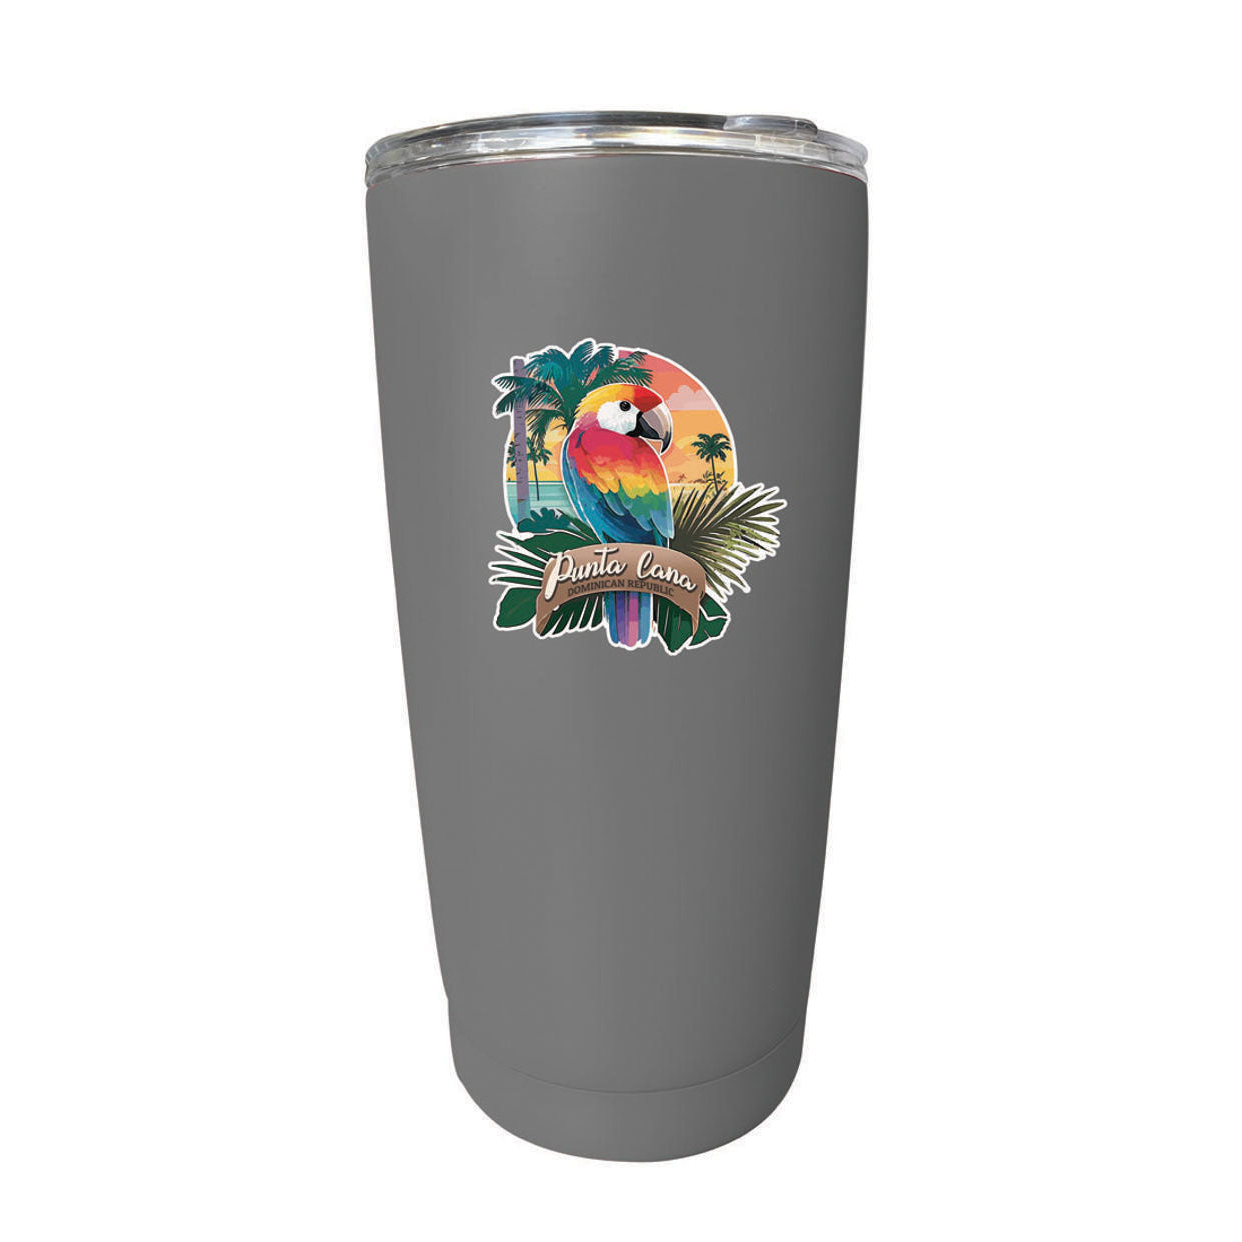 Punta Cana Dominican Republic Souvenir 16 Oz Stainless Steel Insulated Tumbler - Gray, PARROT